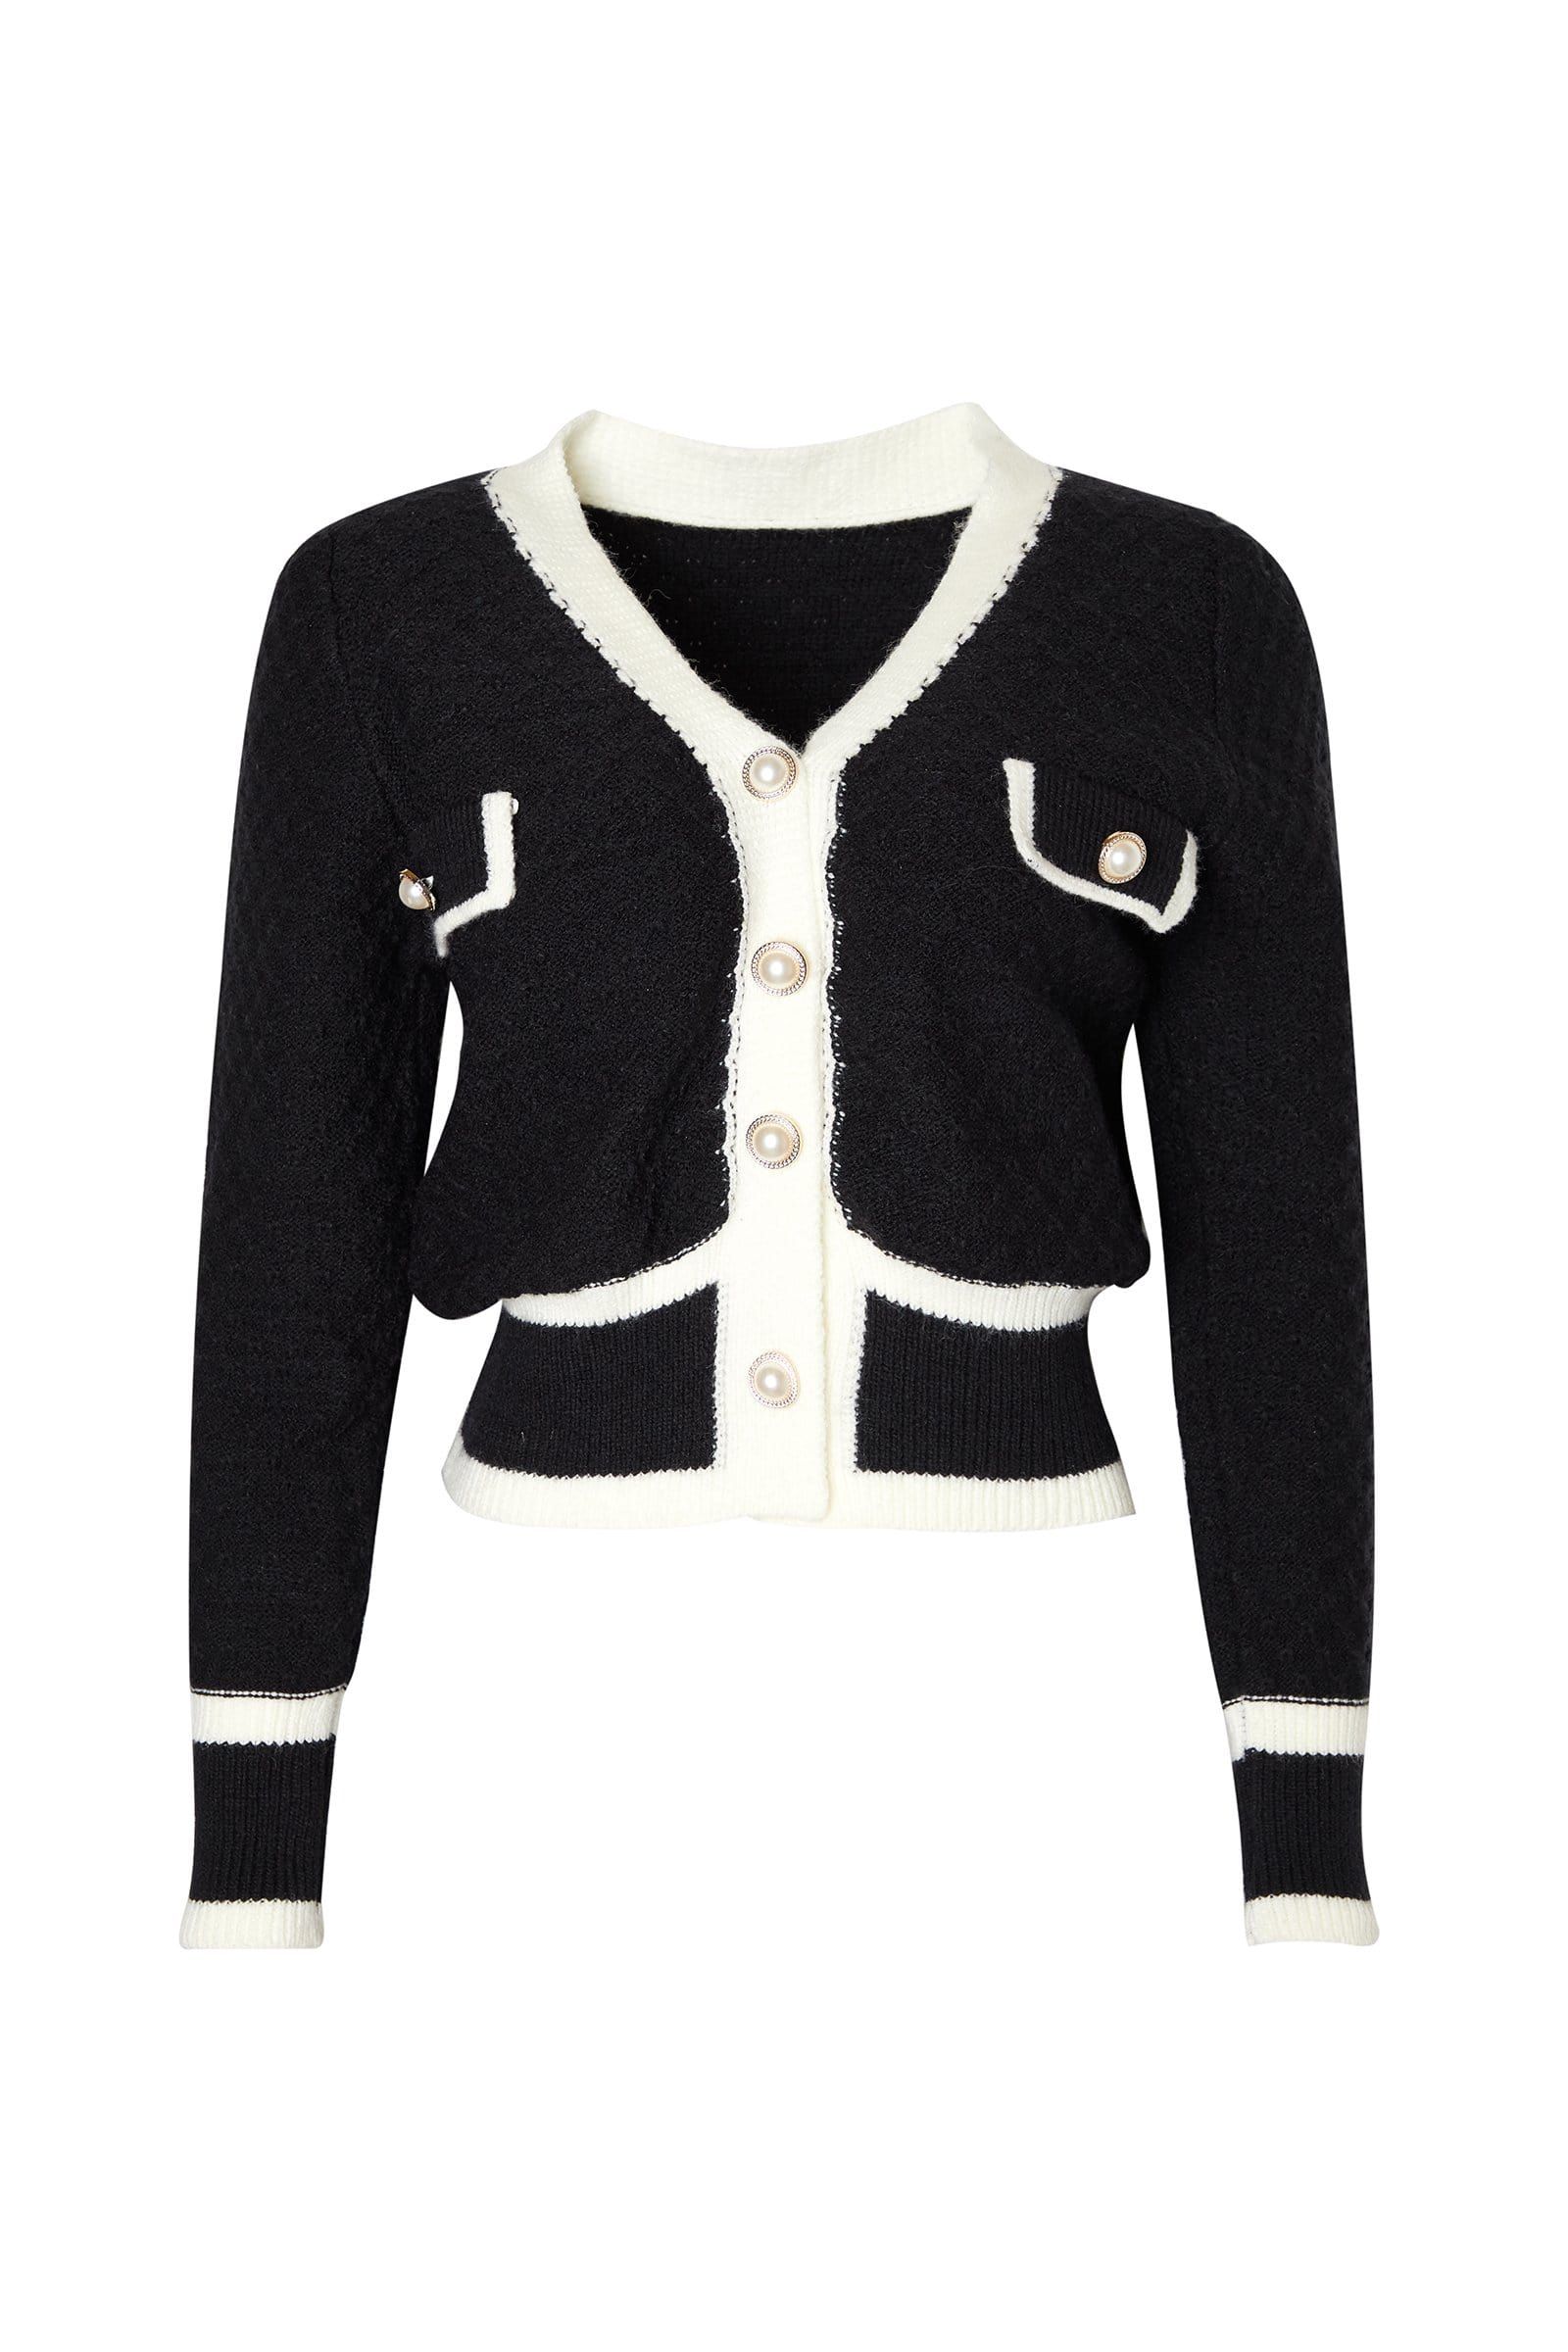 Susie Black Contrast Button Up Knit Cardigan | J.ING